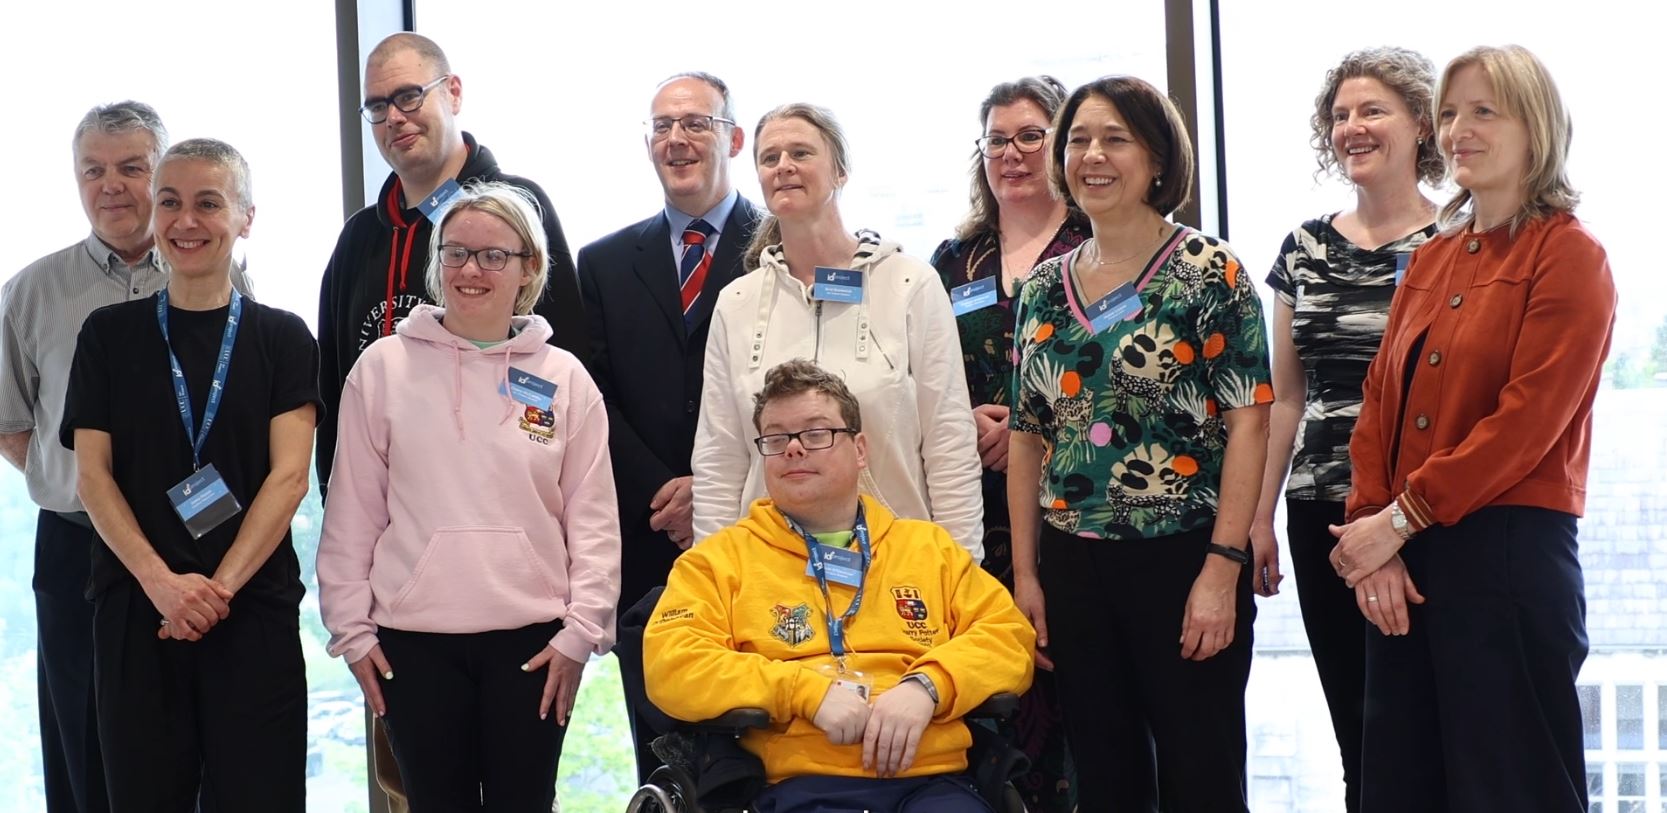 UCC develops intellectual disability inclusion training for higher education sector  